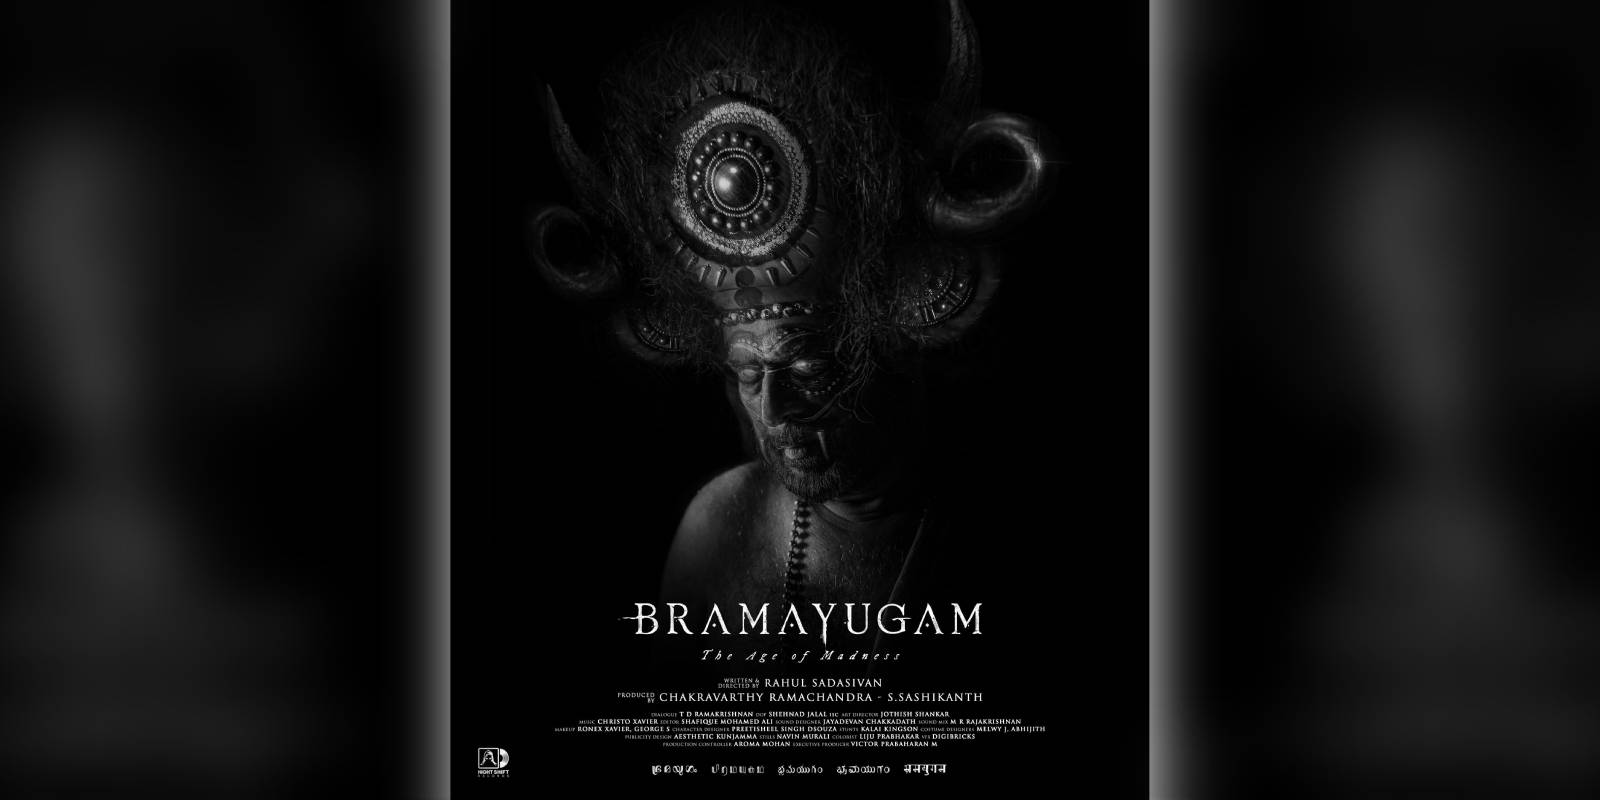 A poster of the film Bramayugam